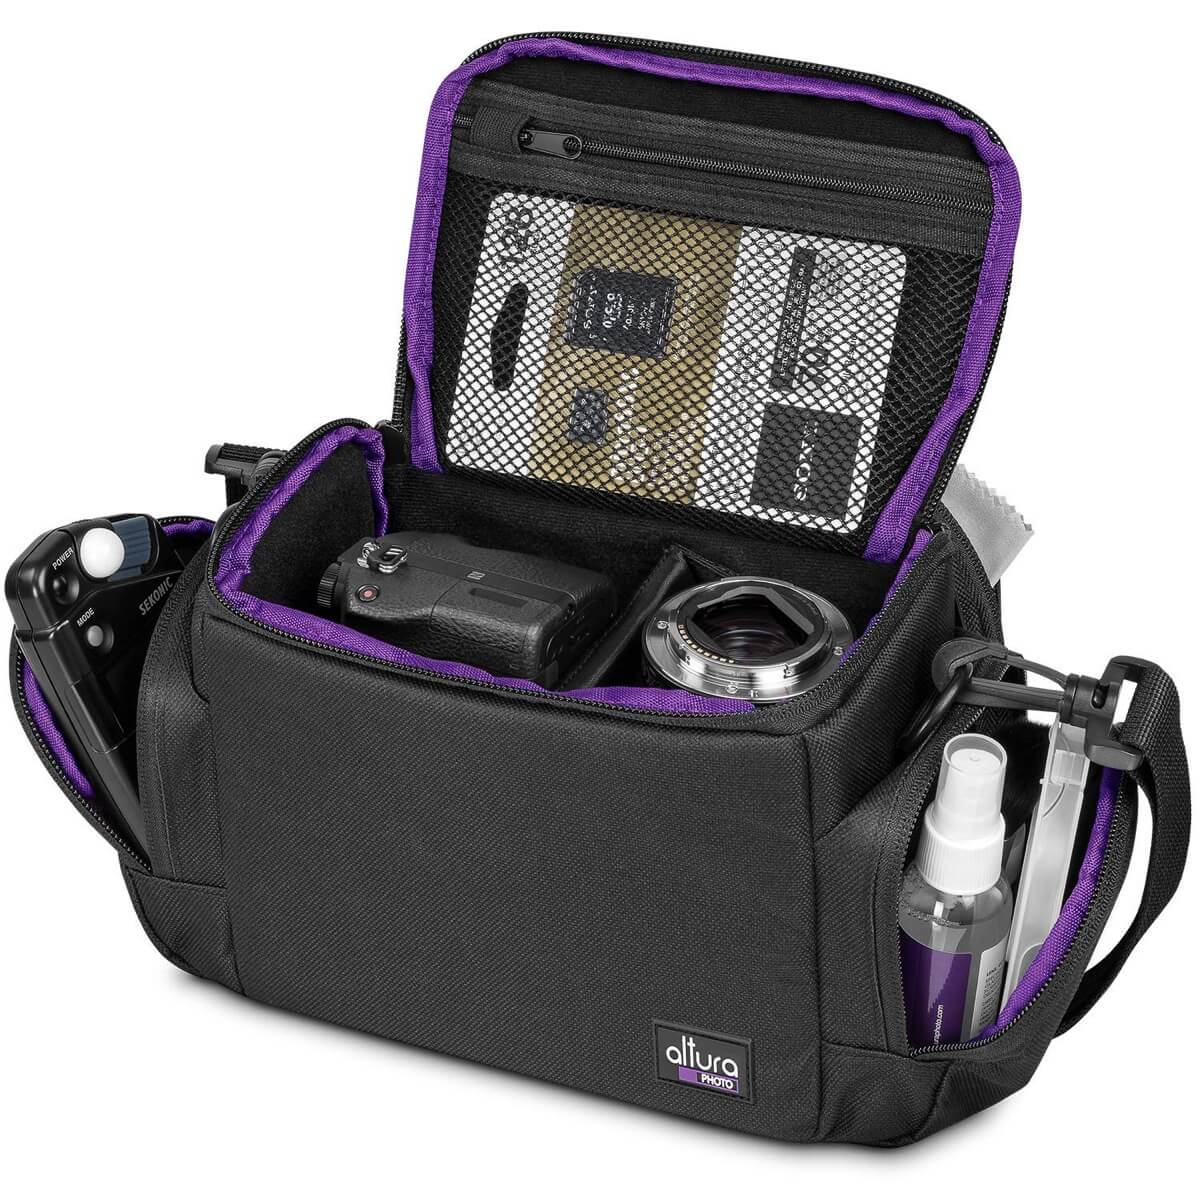 Top more than 84 best dslr camera bags best - in.cdgdbentre